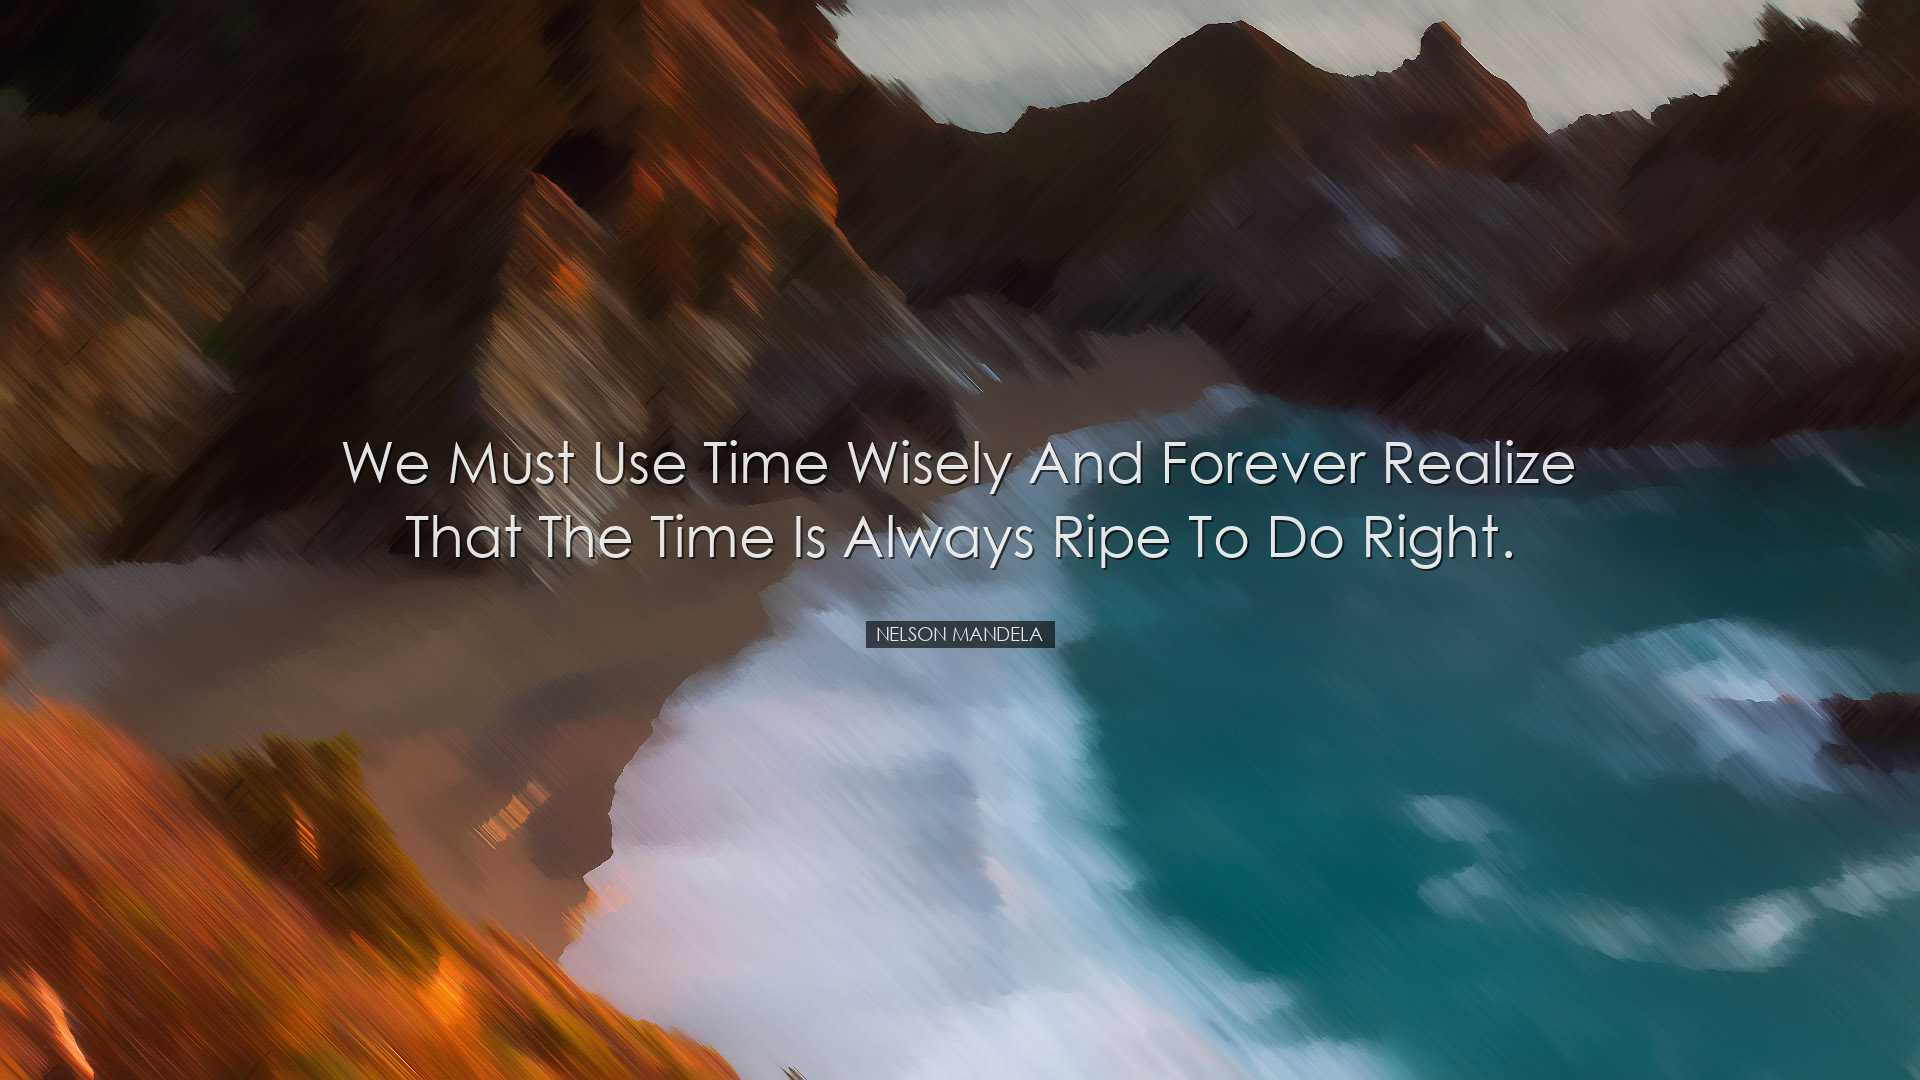 We must use time wisely and forever realize that the time is alway